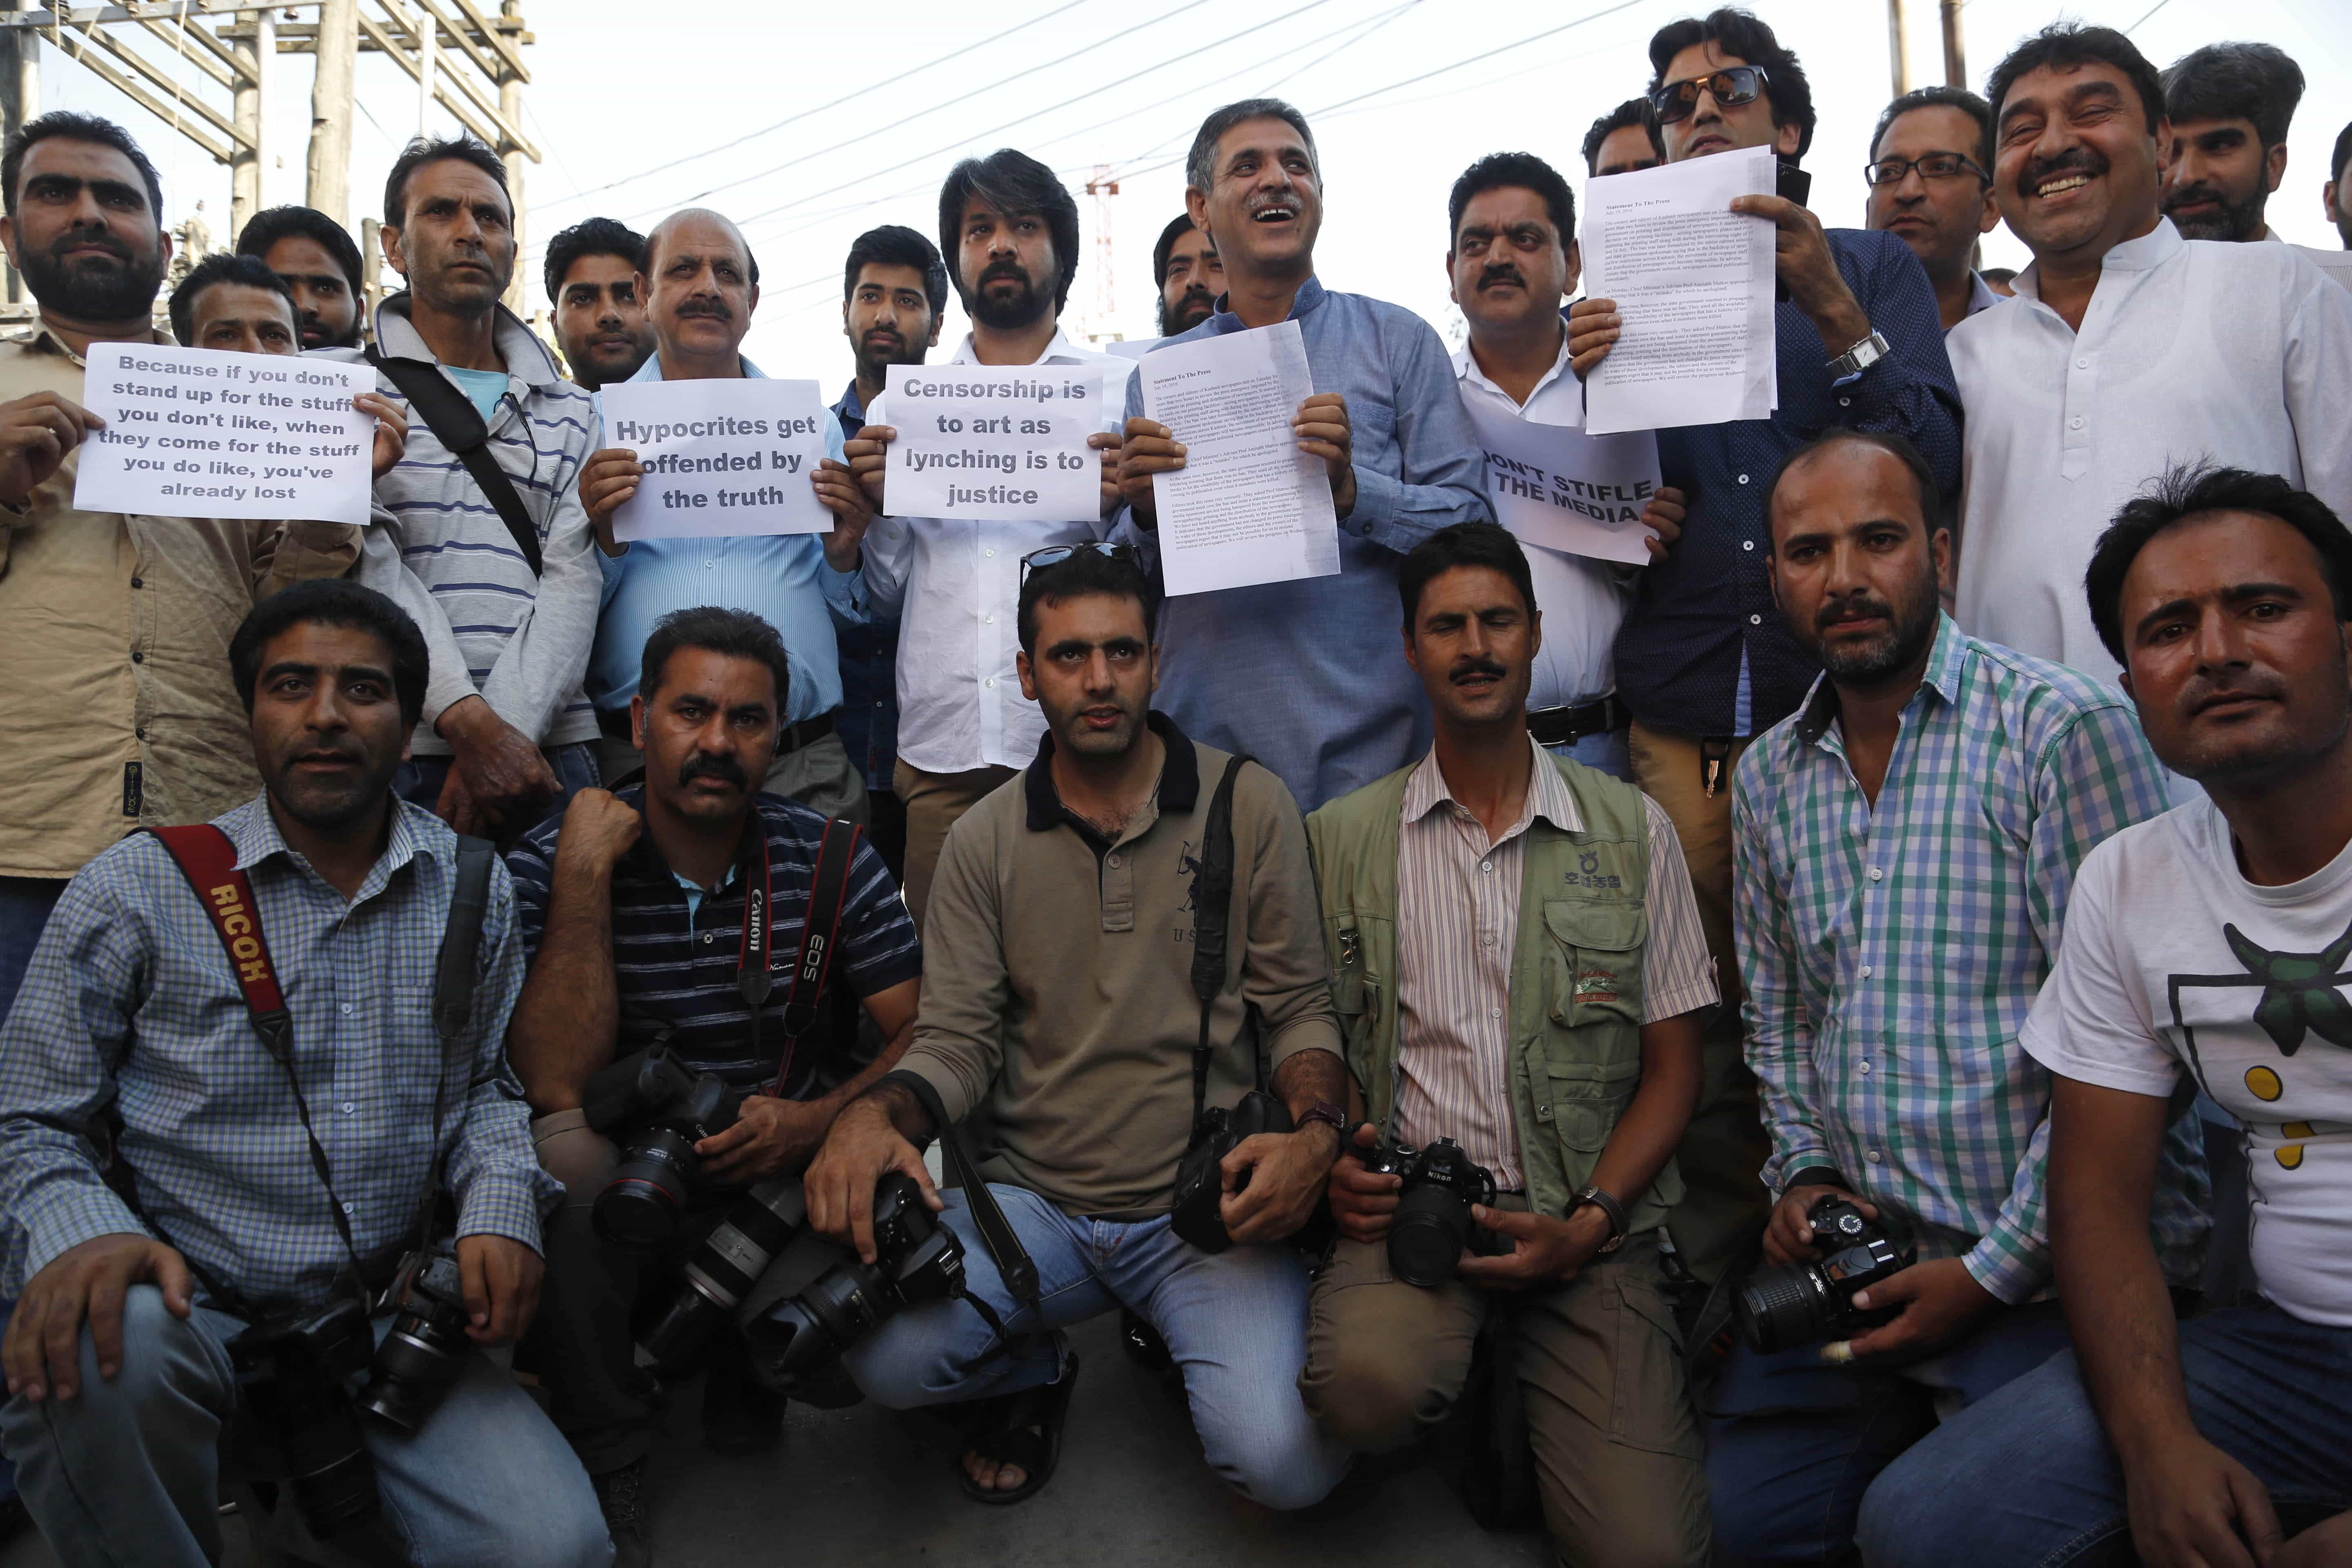 Local journalists hold placards during a protest in Srinagar, India, 19 July 2016, AP Photo/Mukhtar Khan